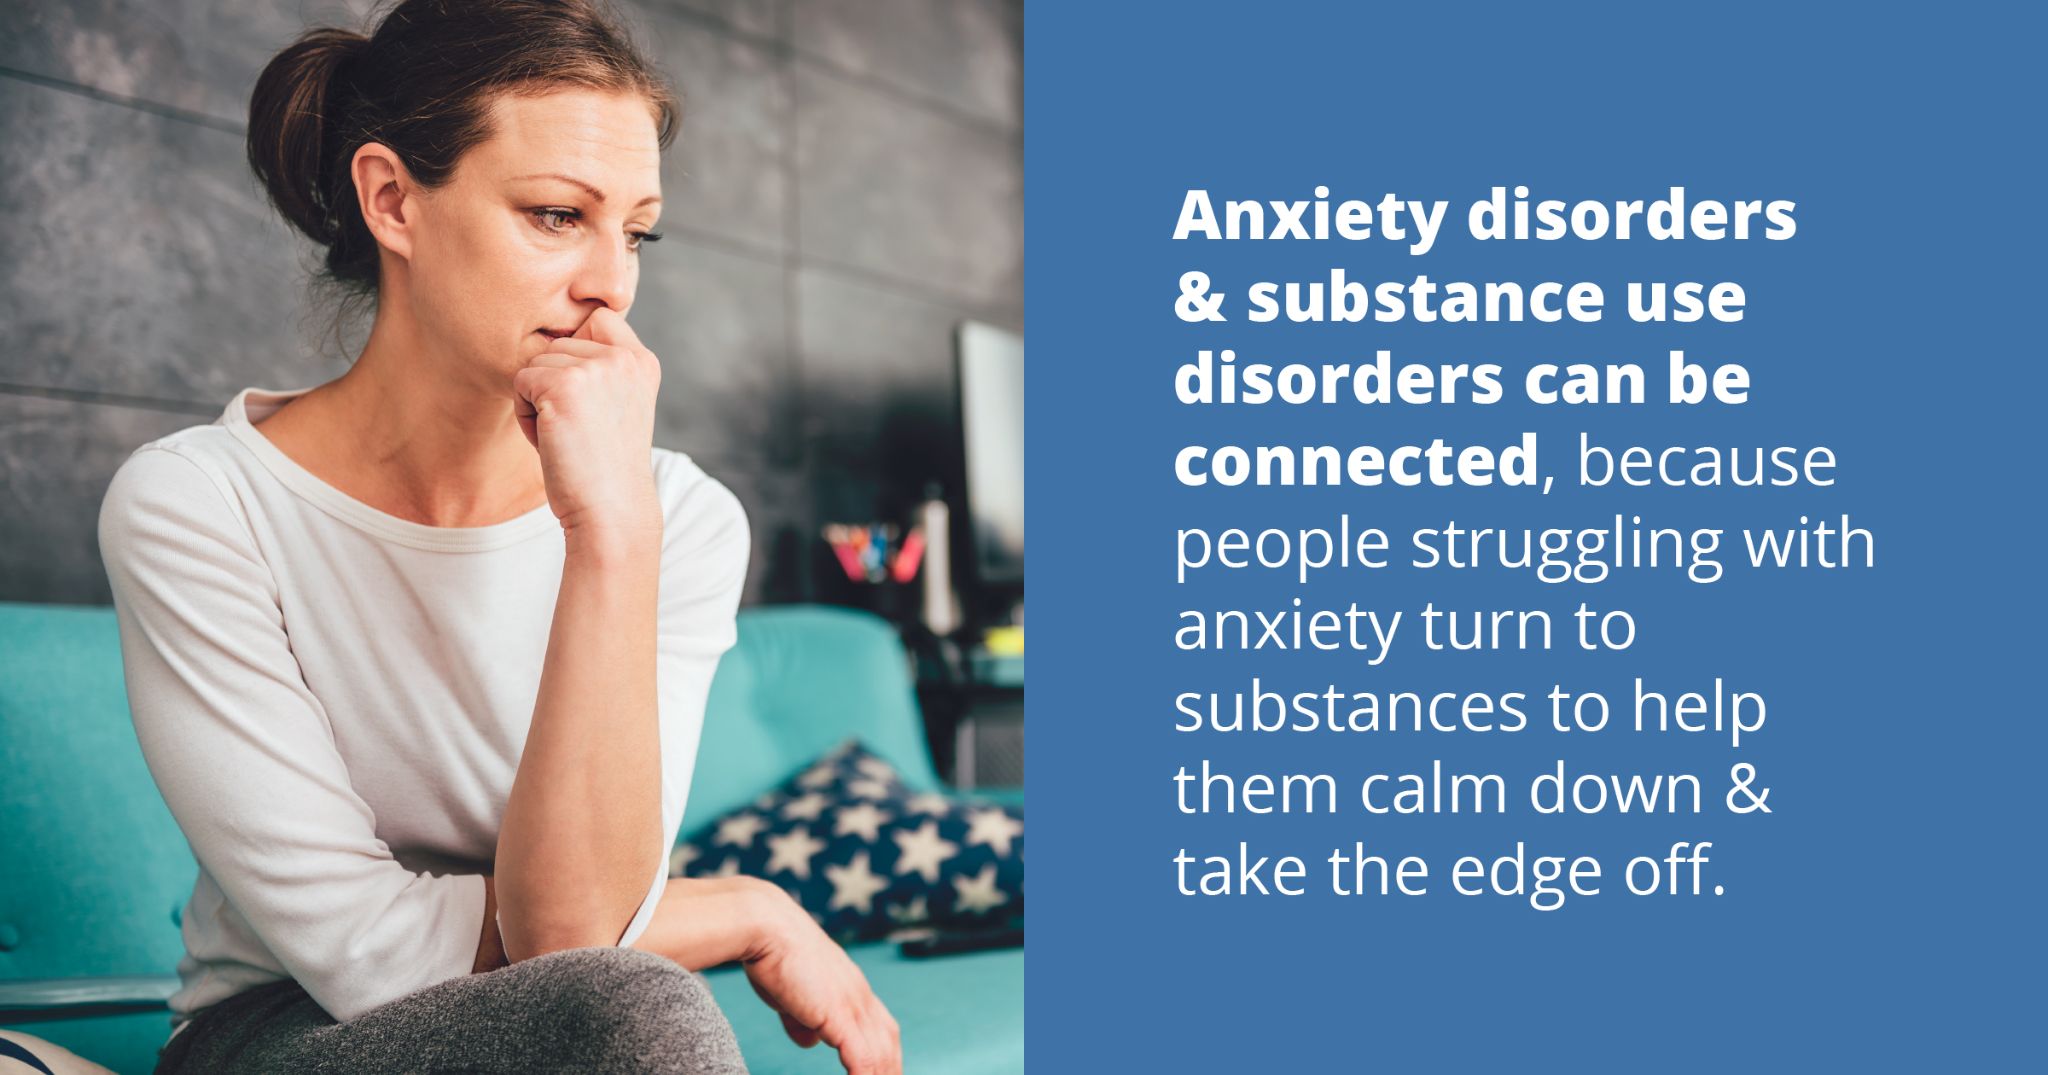 Anxiety disorders & substance use disorders can be connected, because people struggling with anxiety turn to substances to help them calm down & take the edge off.